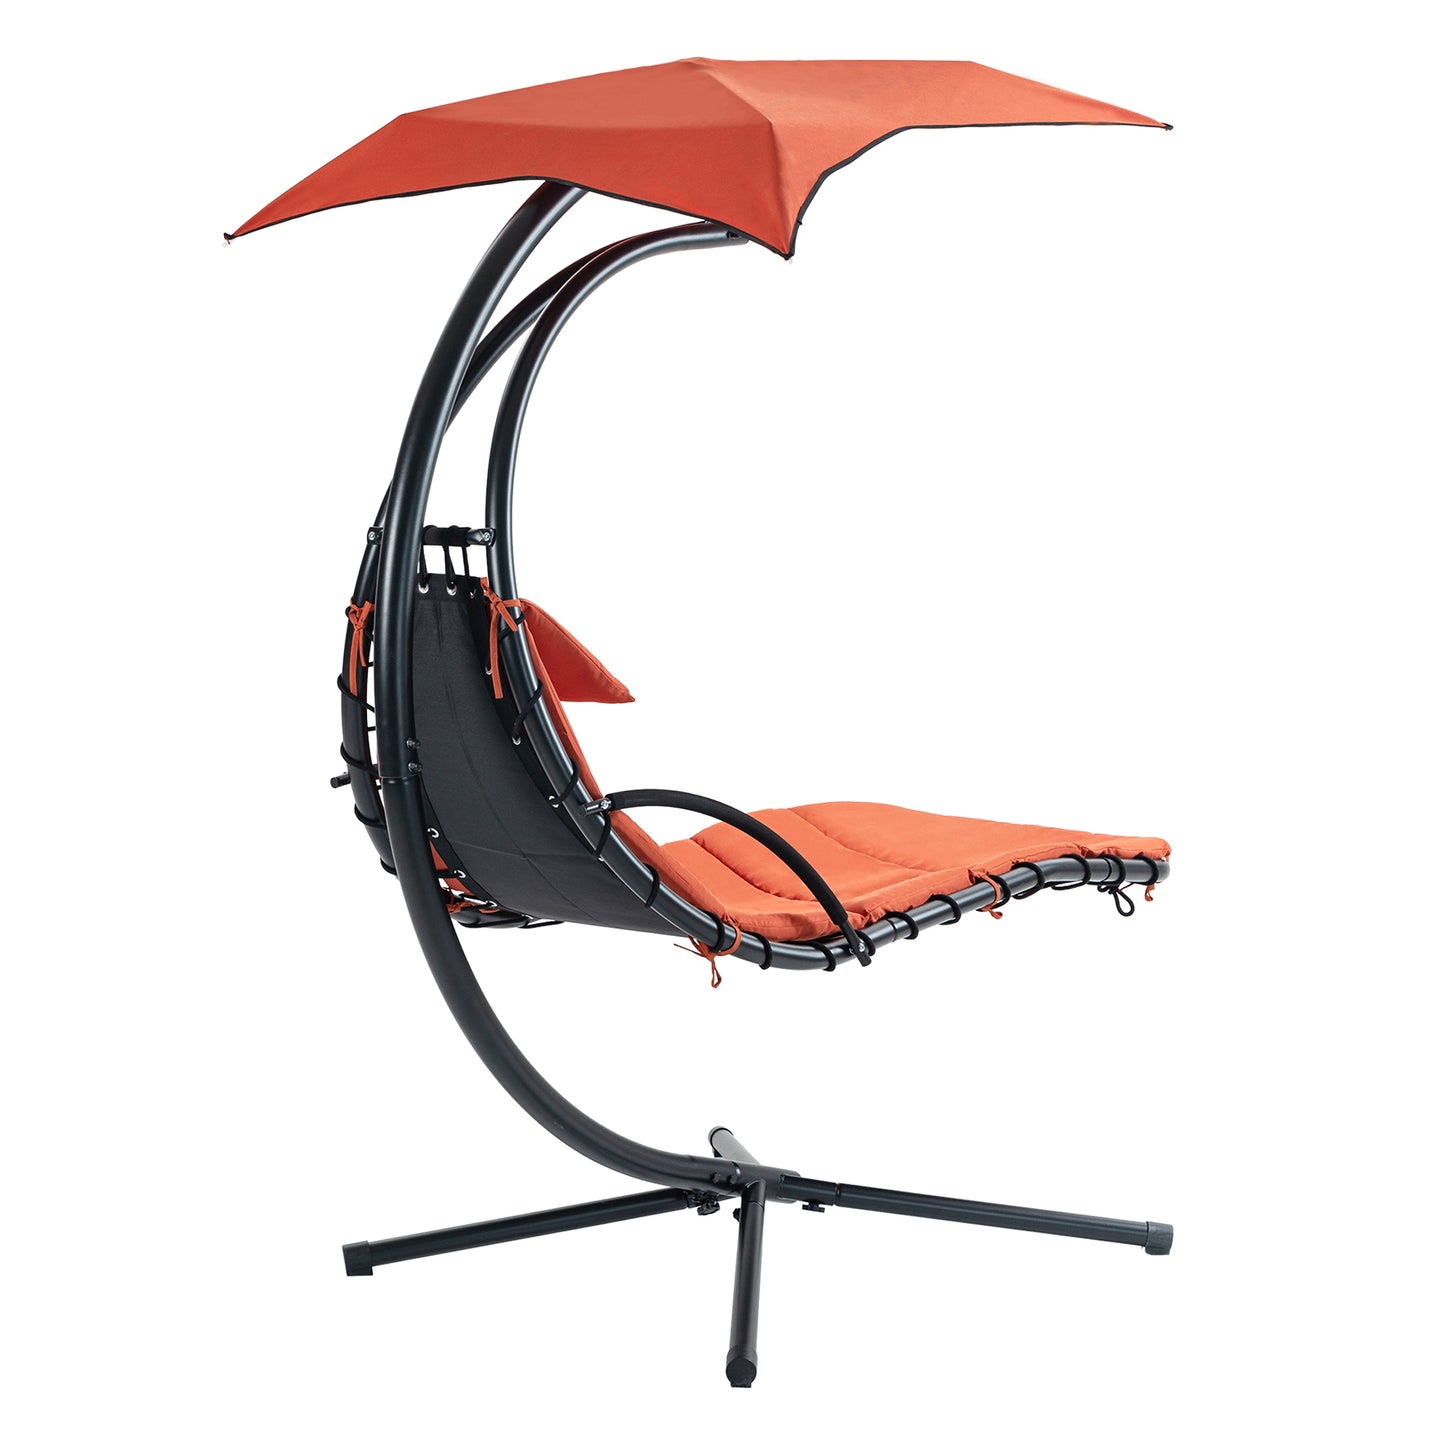 Hanging Chaise Lounger, Removable Canopy, Outdoor Swing Chair